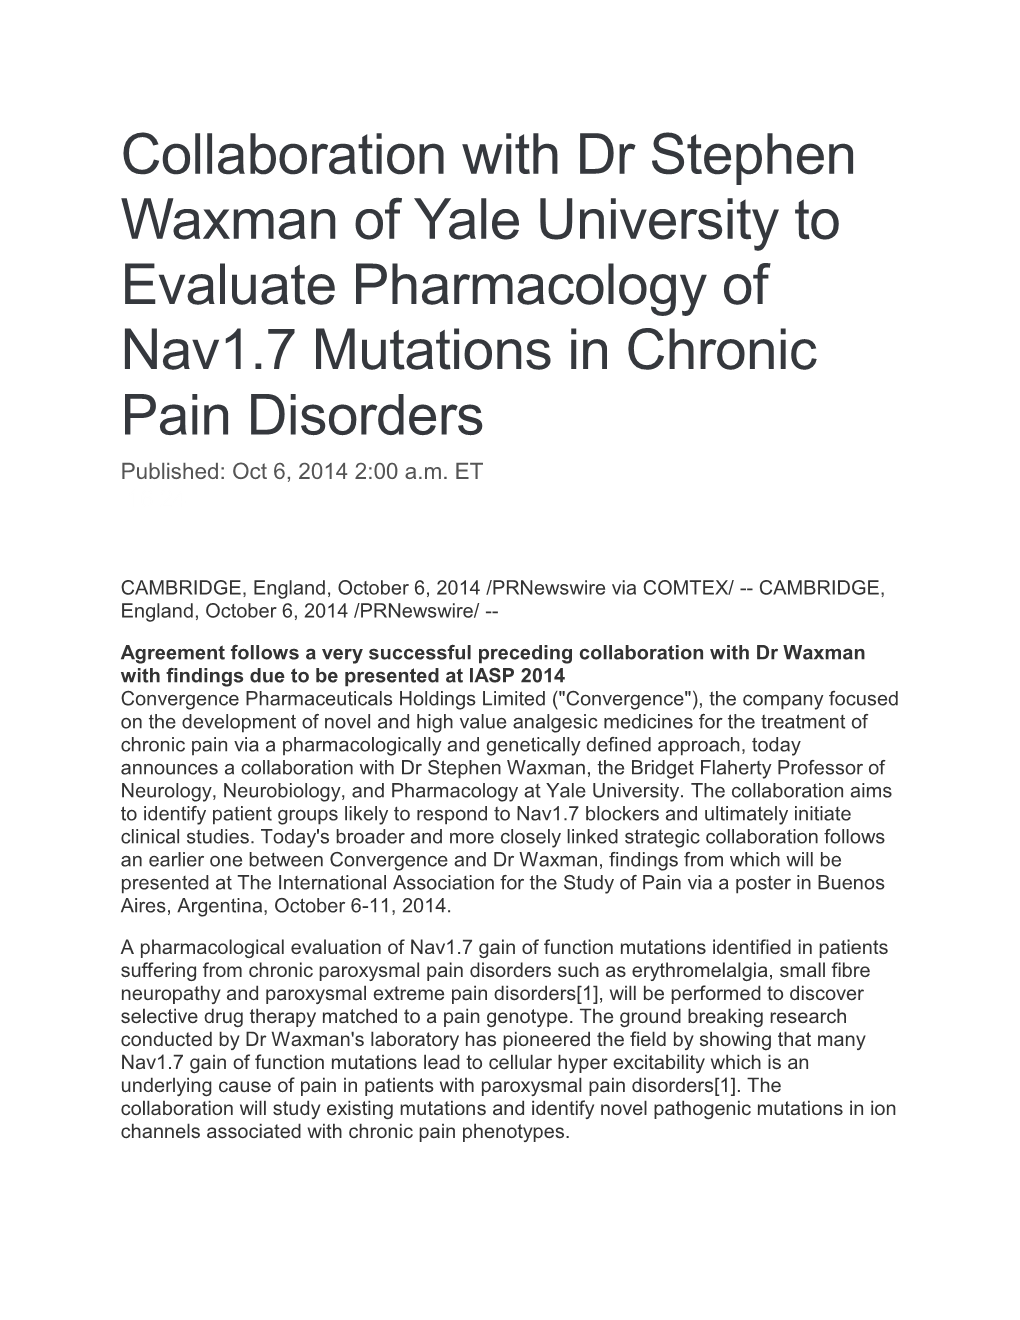 Collaboration with Dr Stephen Waxman of Yale University to Evaluate Pharmacology of Nav1.7 Mutations in Chronic Pain Disorders Published: Oct 6, 2014 2:00 A.M